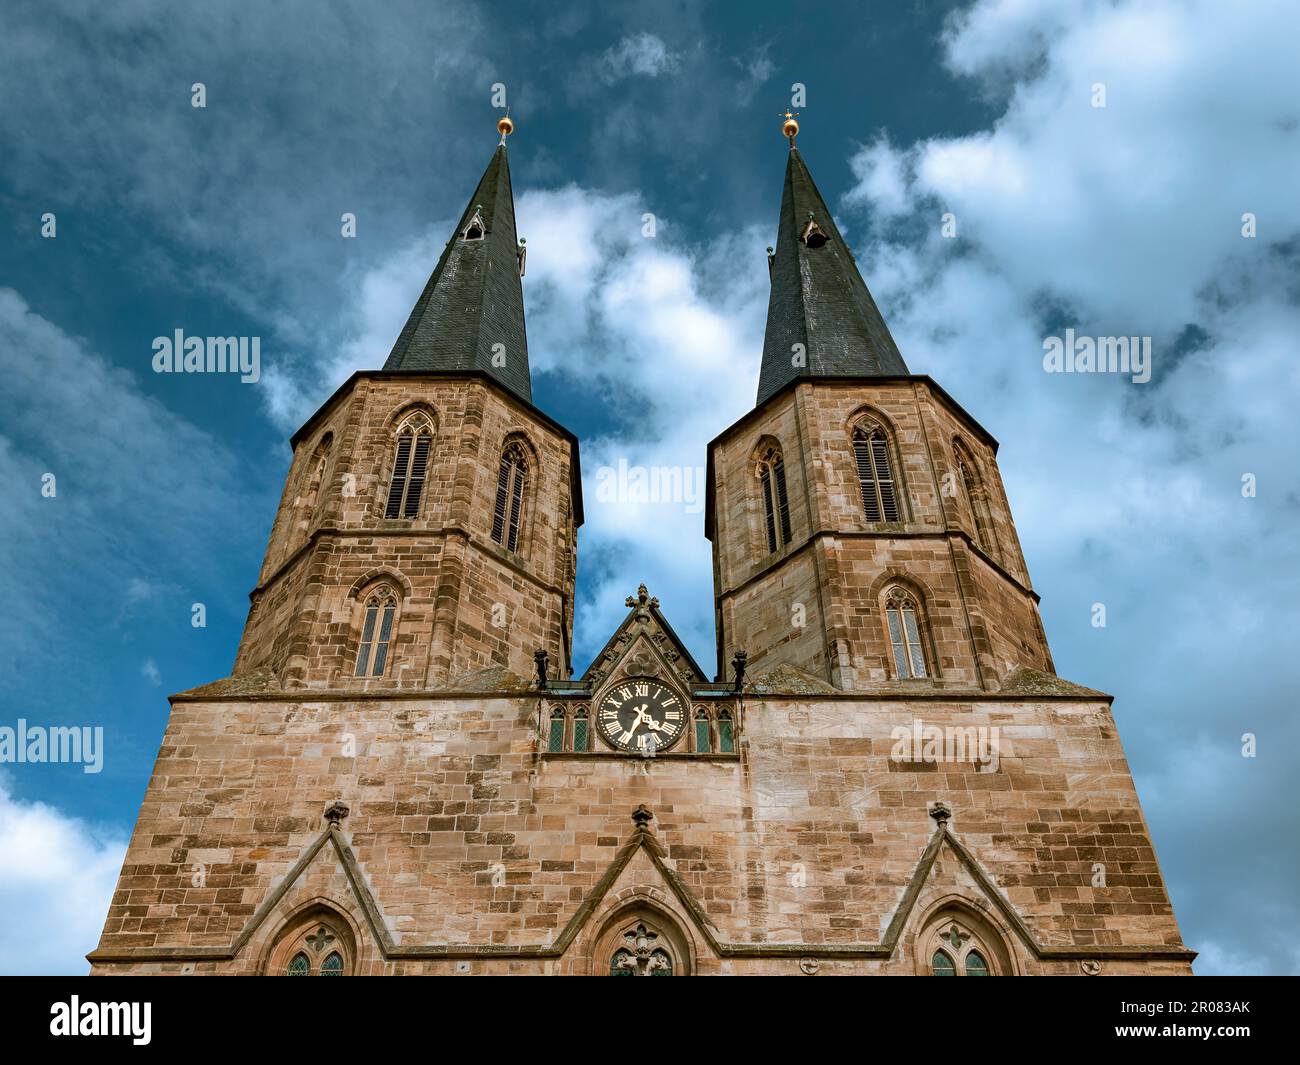 Upper portal and towers of the Basilica St. Cyriakus in Duderstadt, Germany Stock Photo